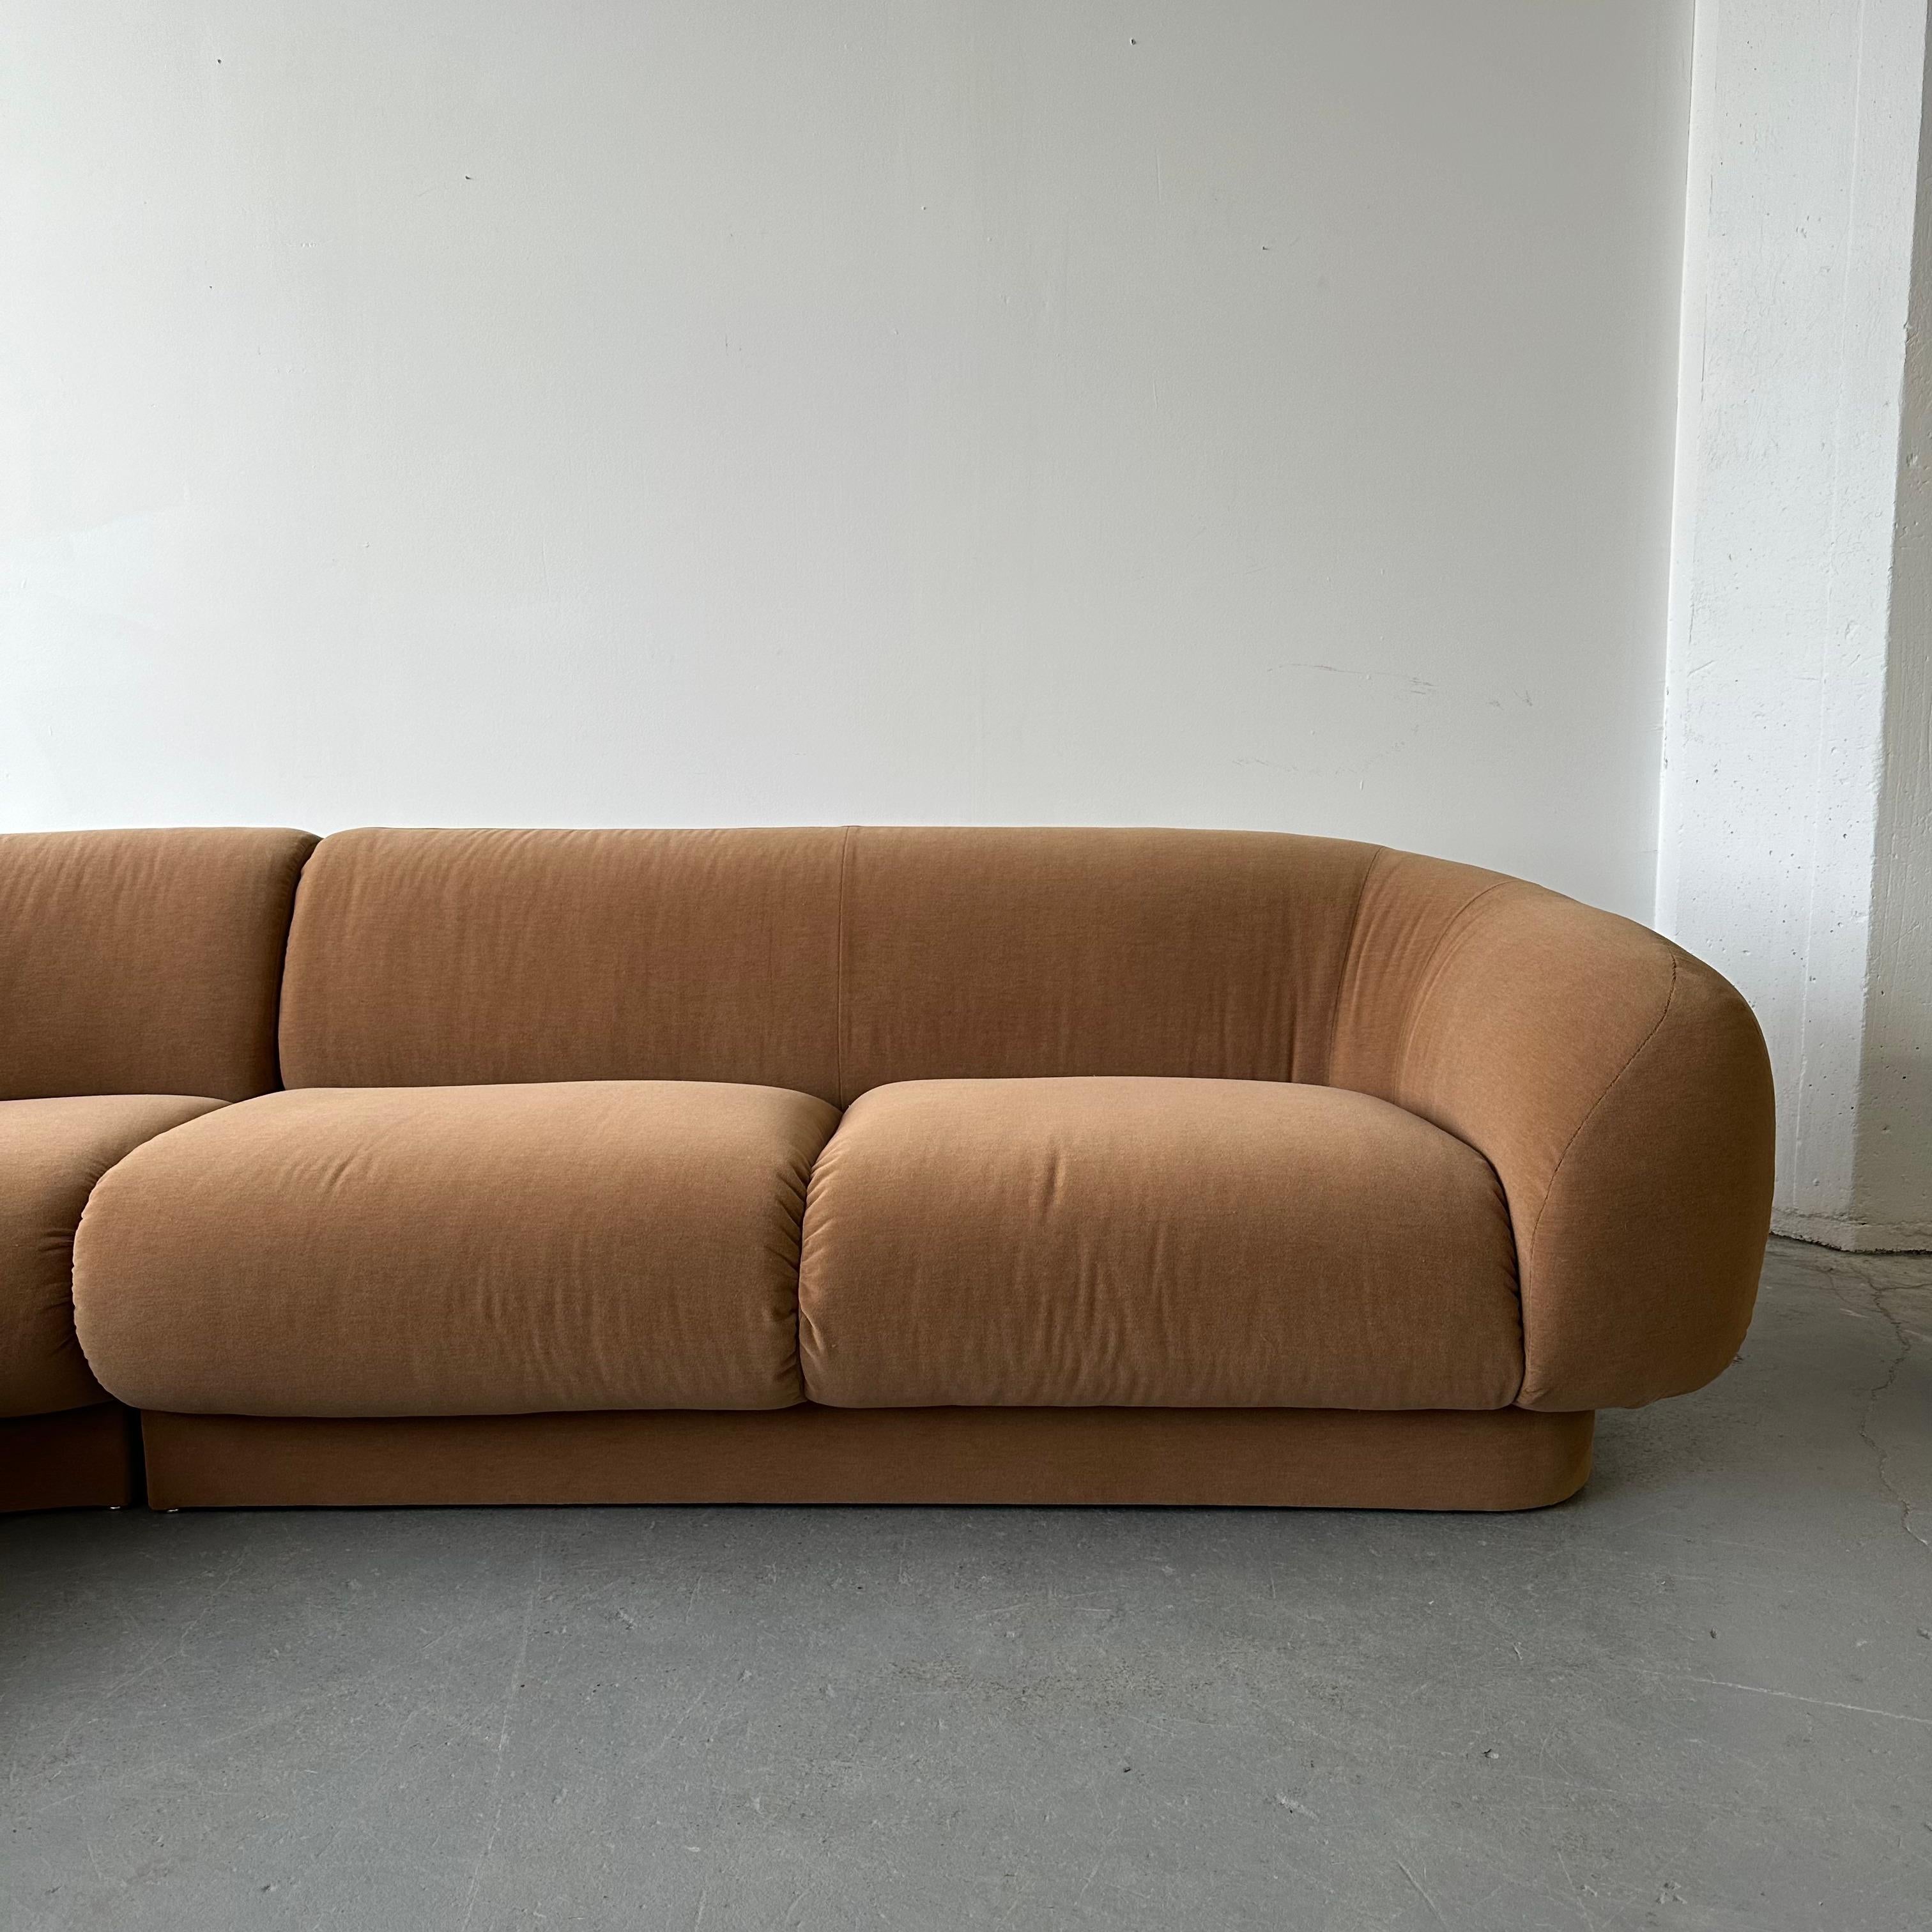 Amphibious-Style Sectional Attributed to Steve Chase In Good Condition For Sale In Chicago, IL